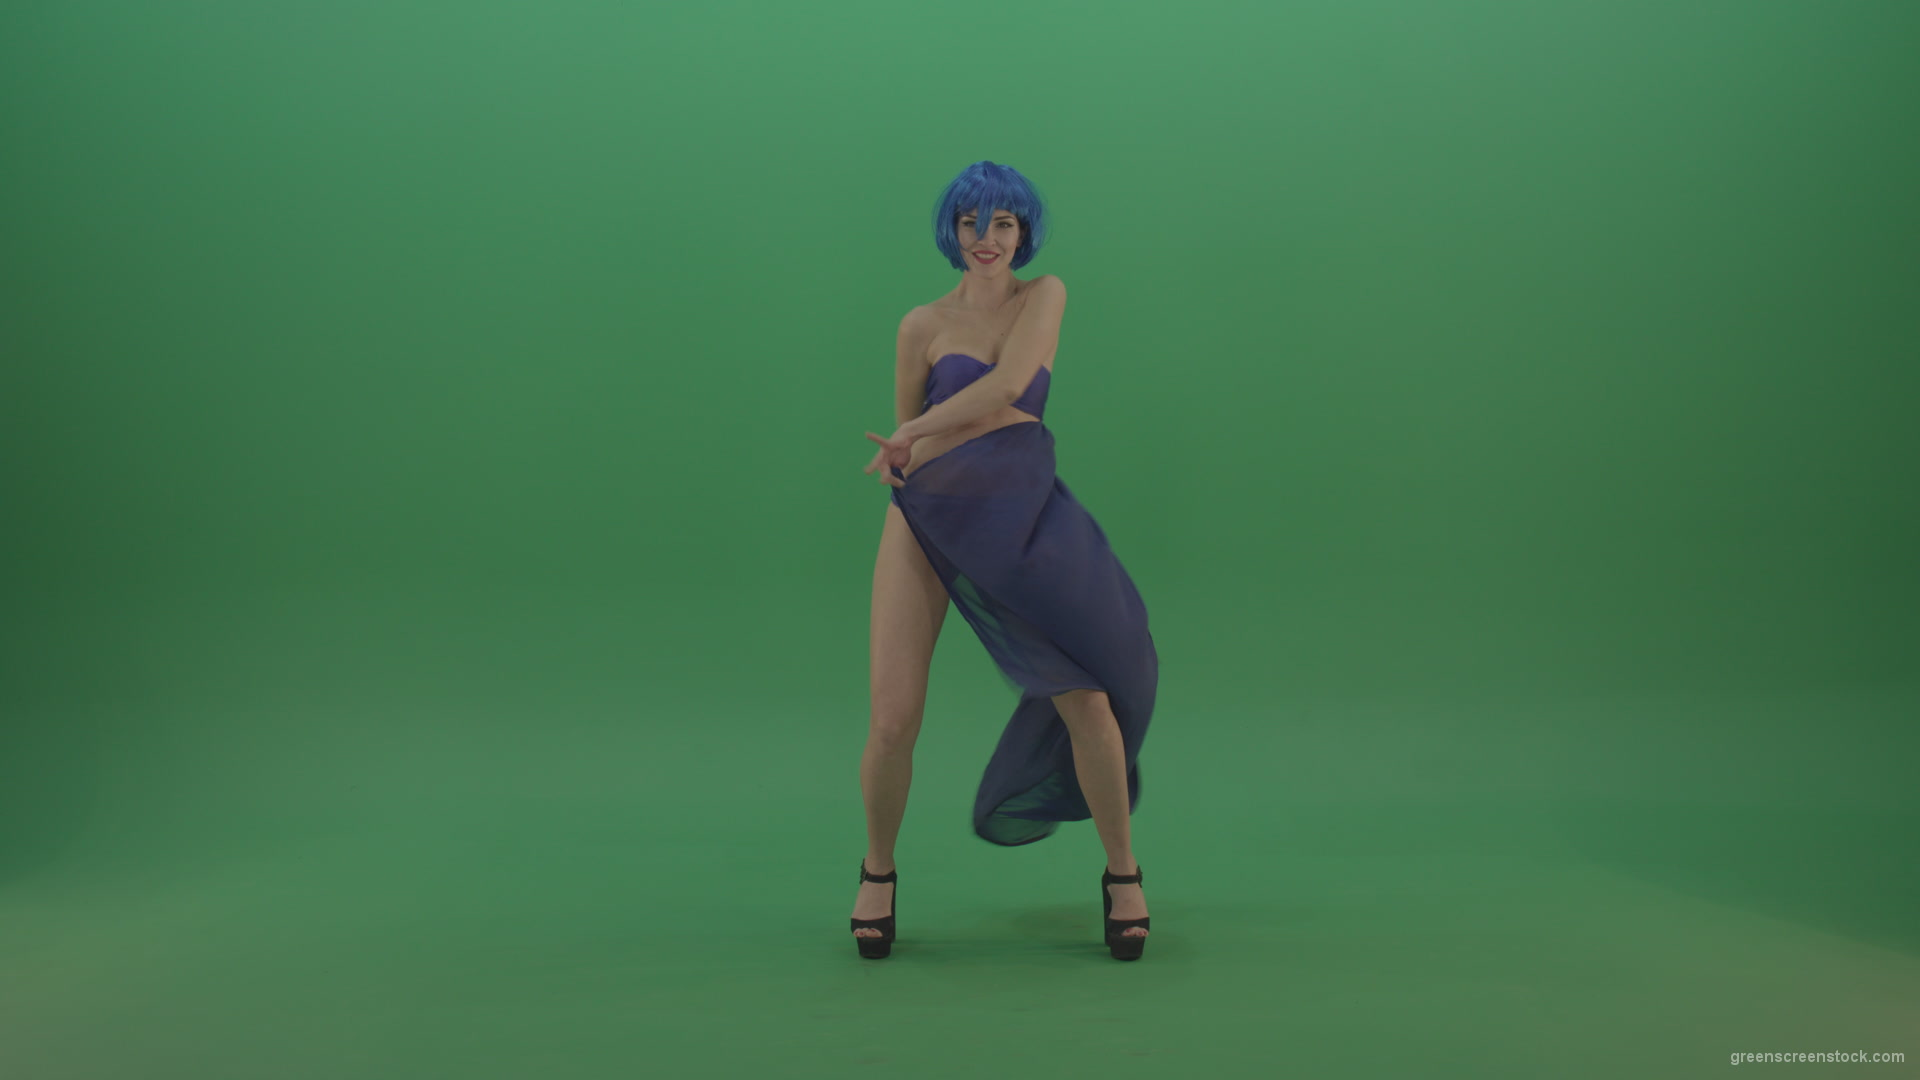 Full-size-erotic-young-girl-dancing-go-go-with-blue-dress-curtain-on-green-screen-1_008 Green Screen Stock